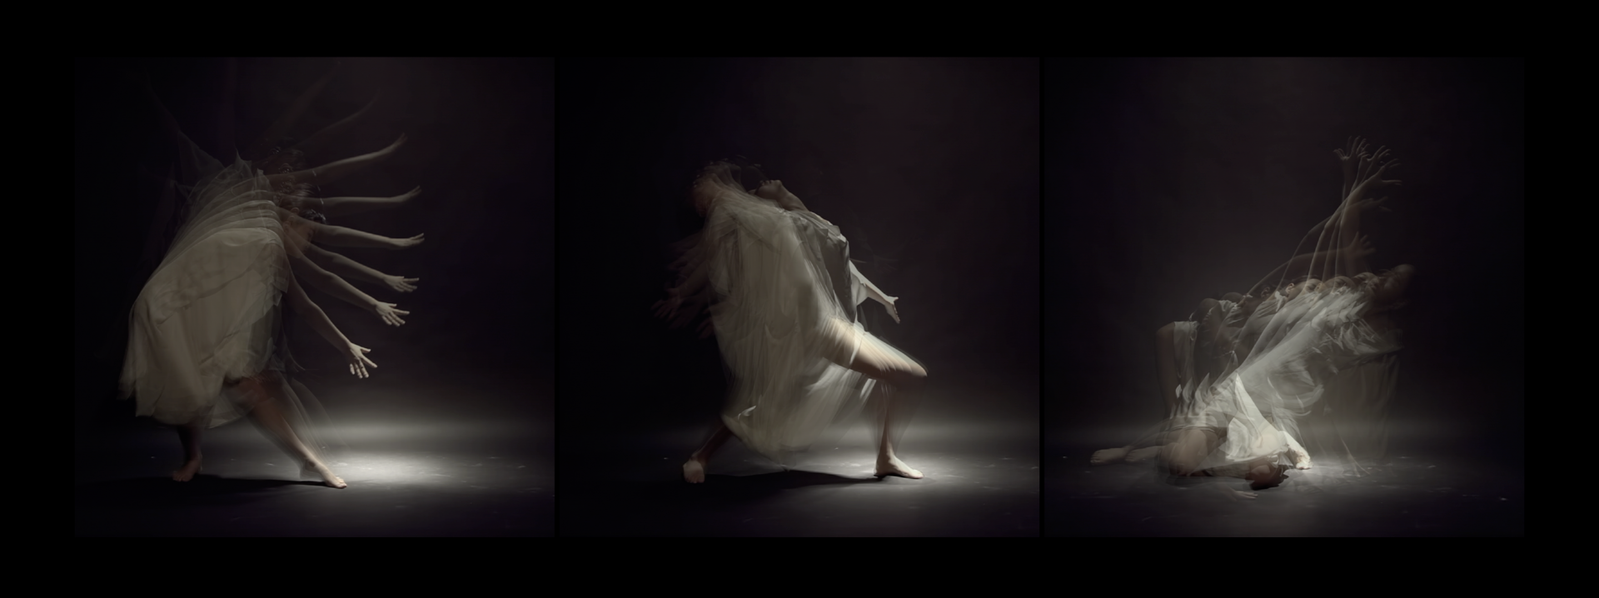 Still images from Dance performance